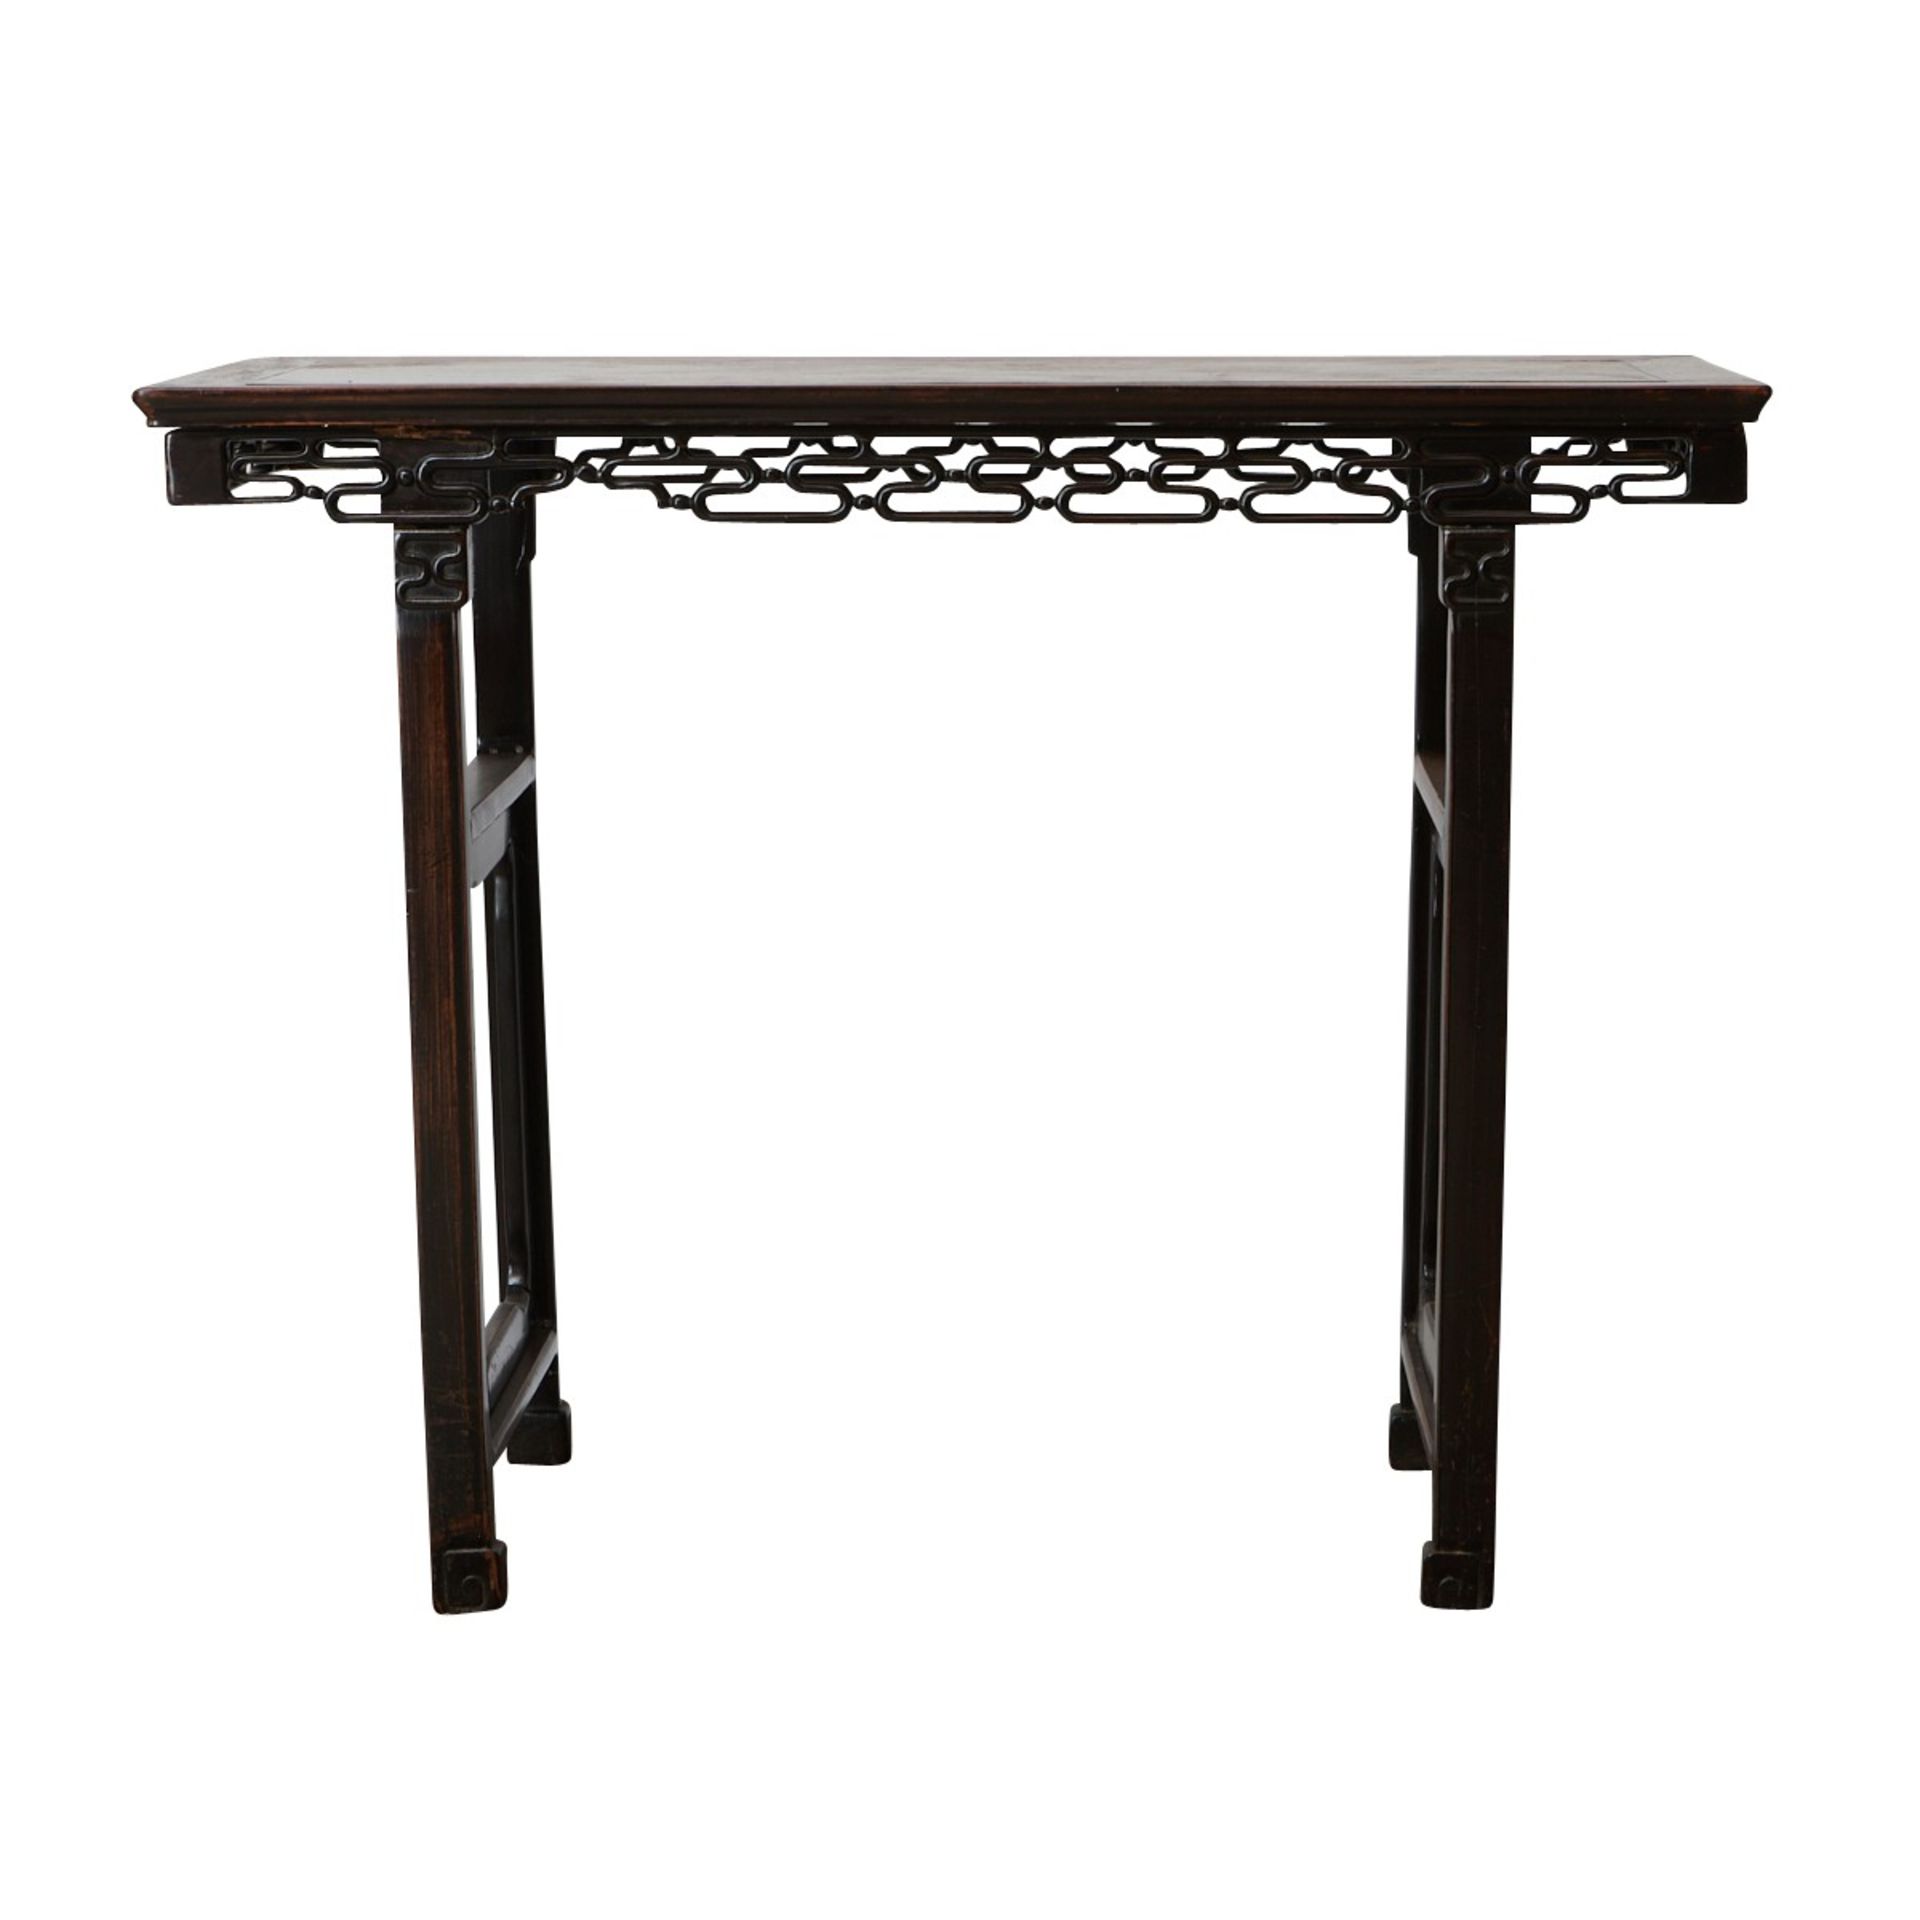 19th c. Chinese Hardwood Altar Table - Image 8 of 11